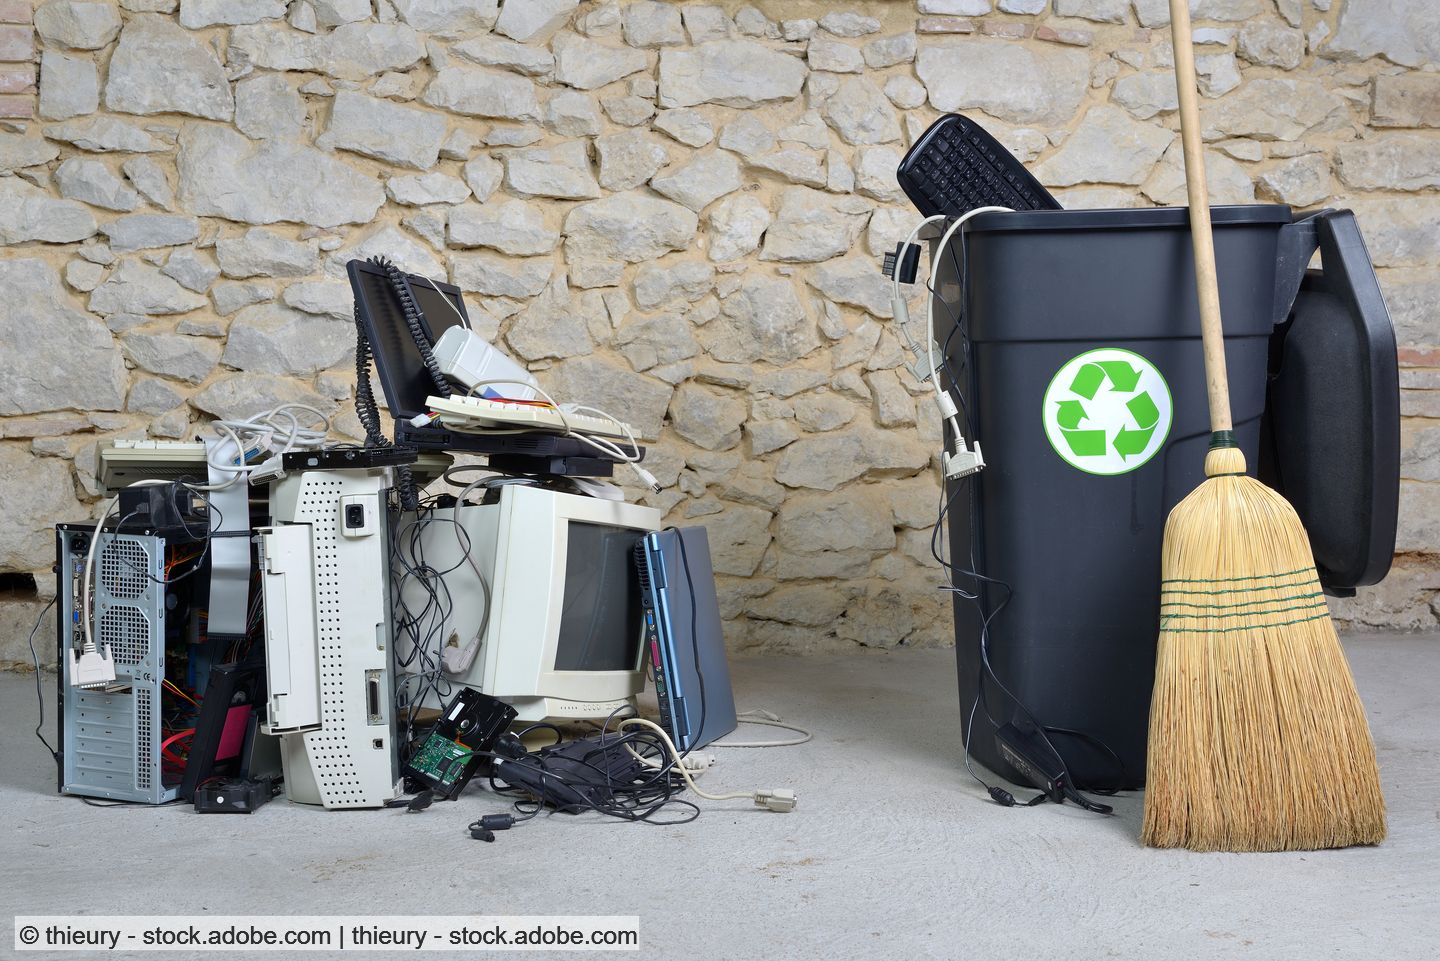 Remondis subsidiary scoops up much of Sims' European e-waste business